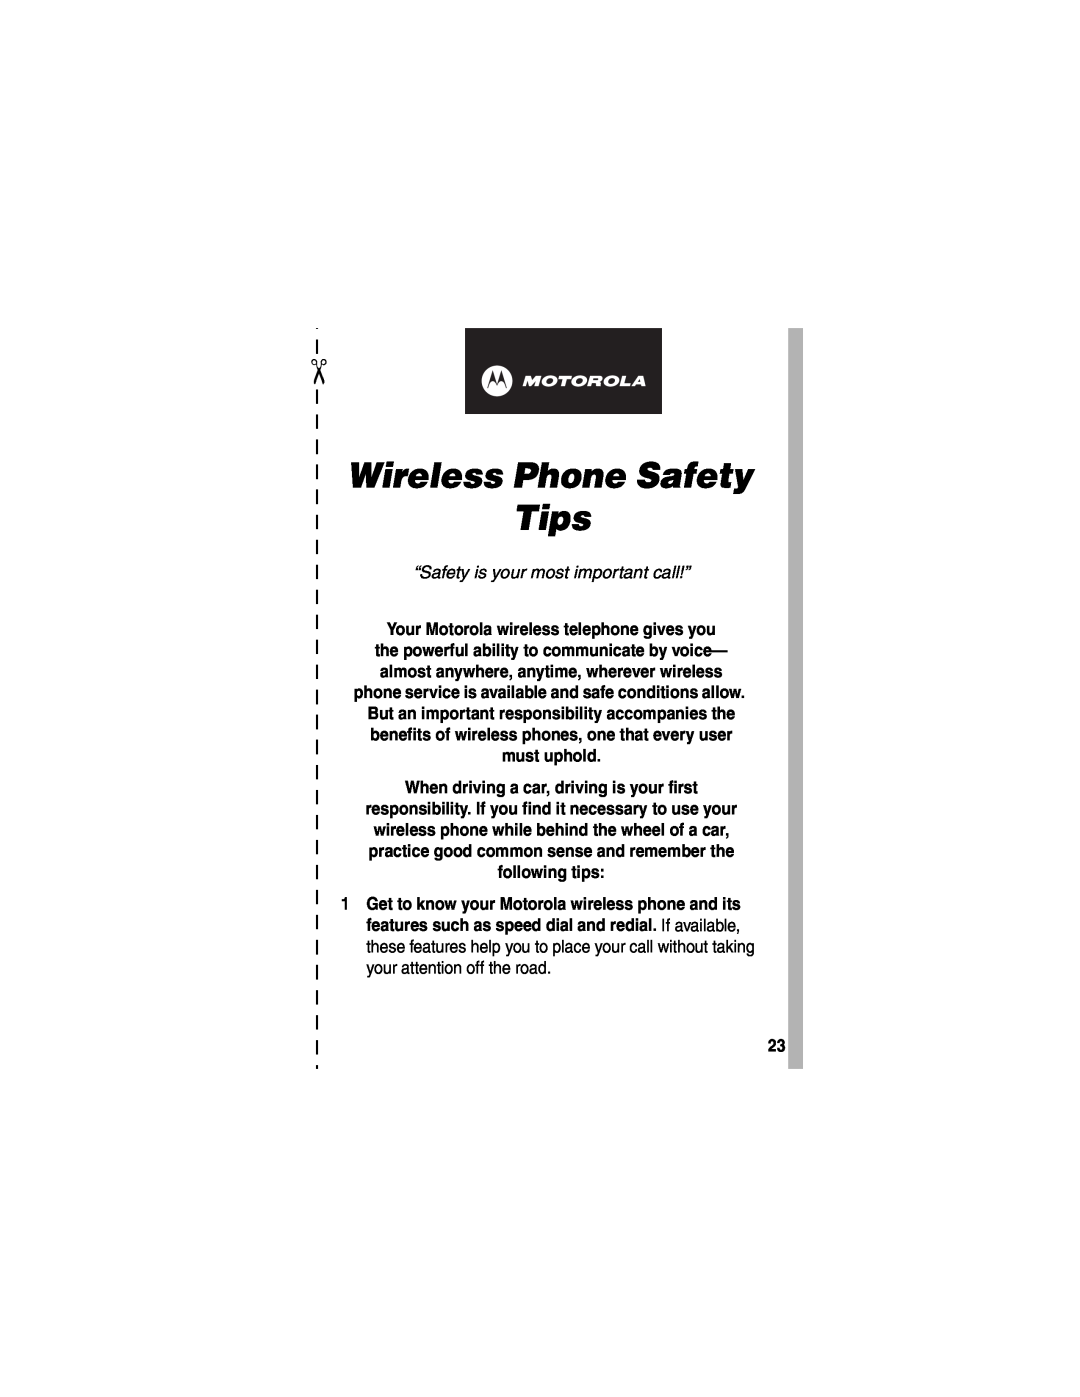 Motorola V555 manual Wireless Phone Safety Tips, “Safety is your most important call!” 